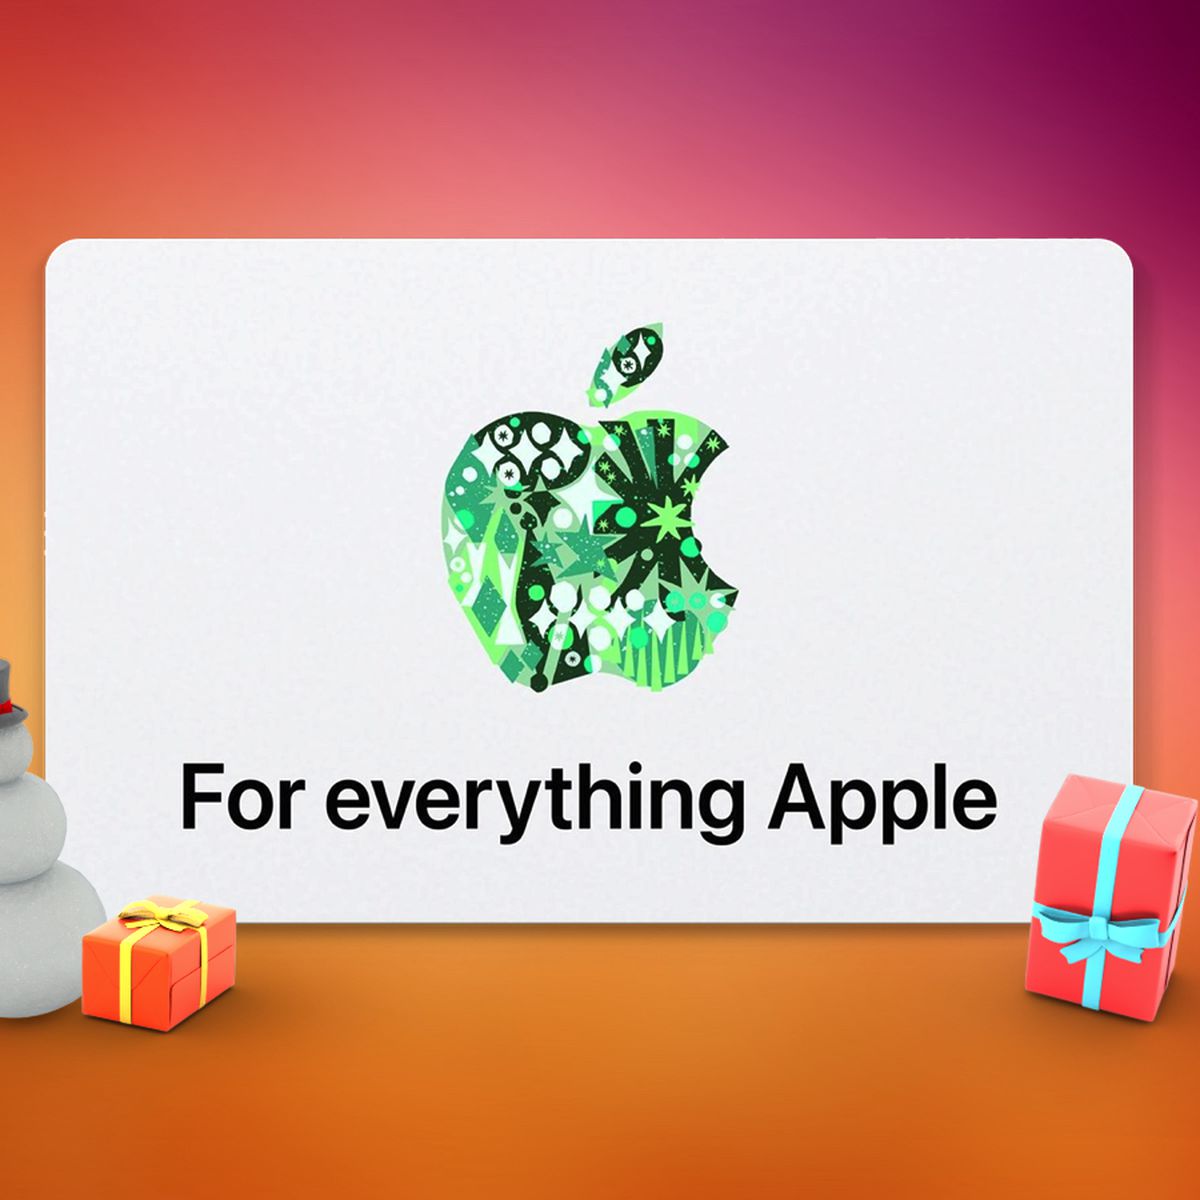 15 Ways to Spend an Apple Gift Card You Received for Christmas